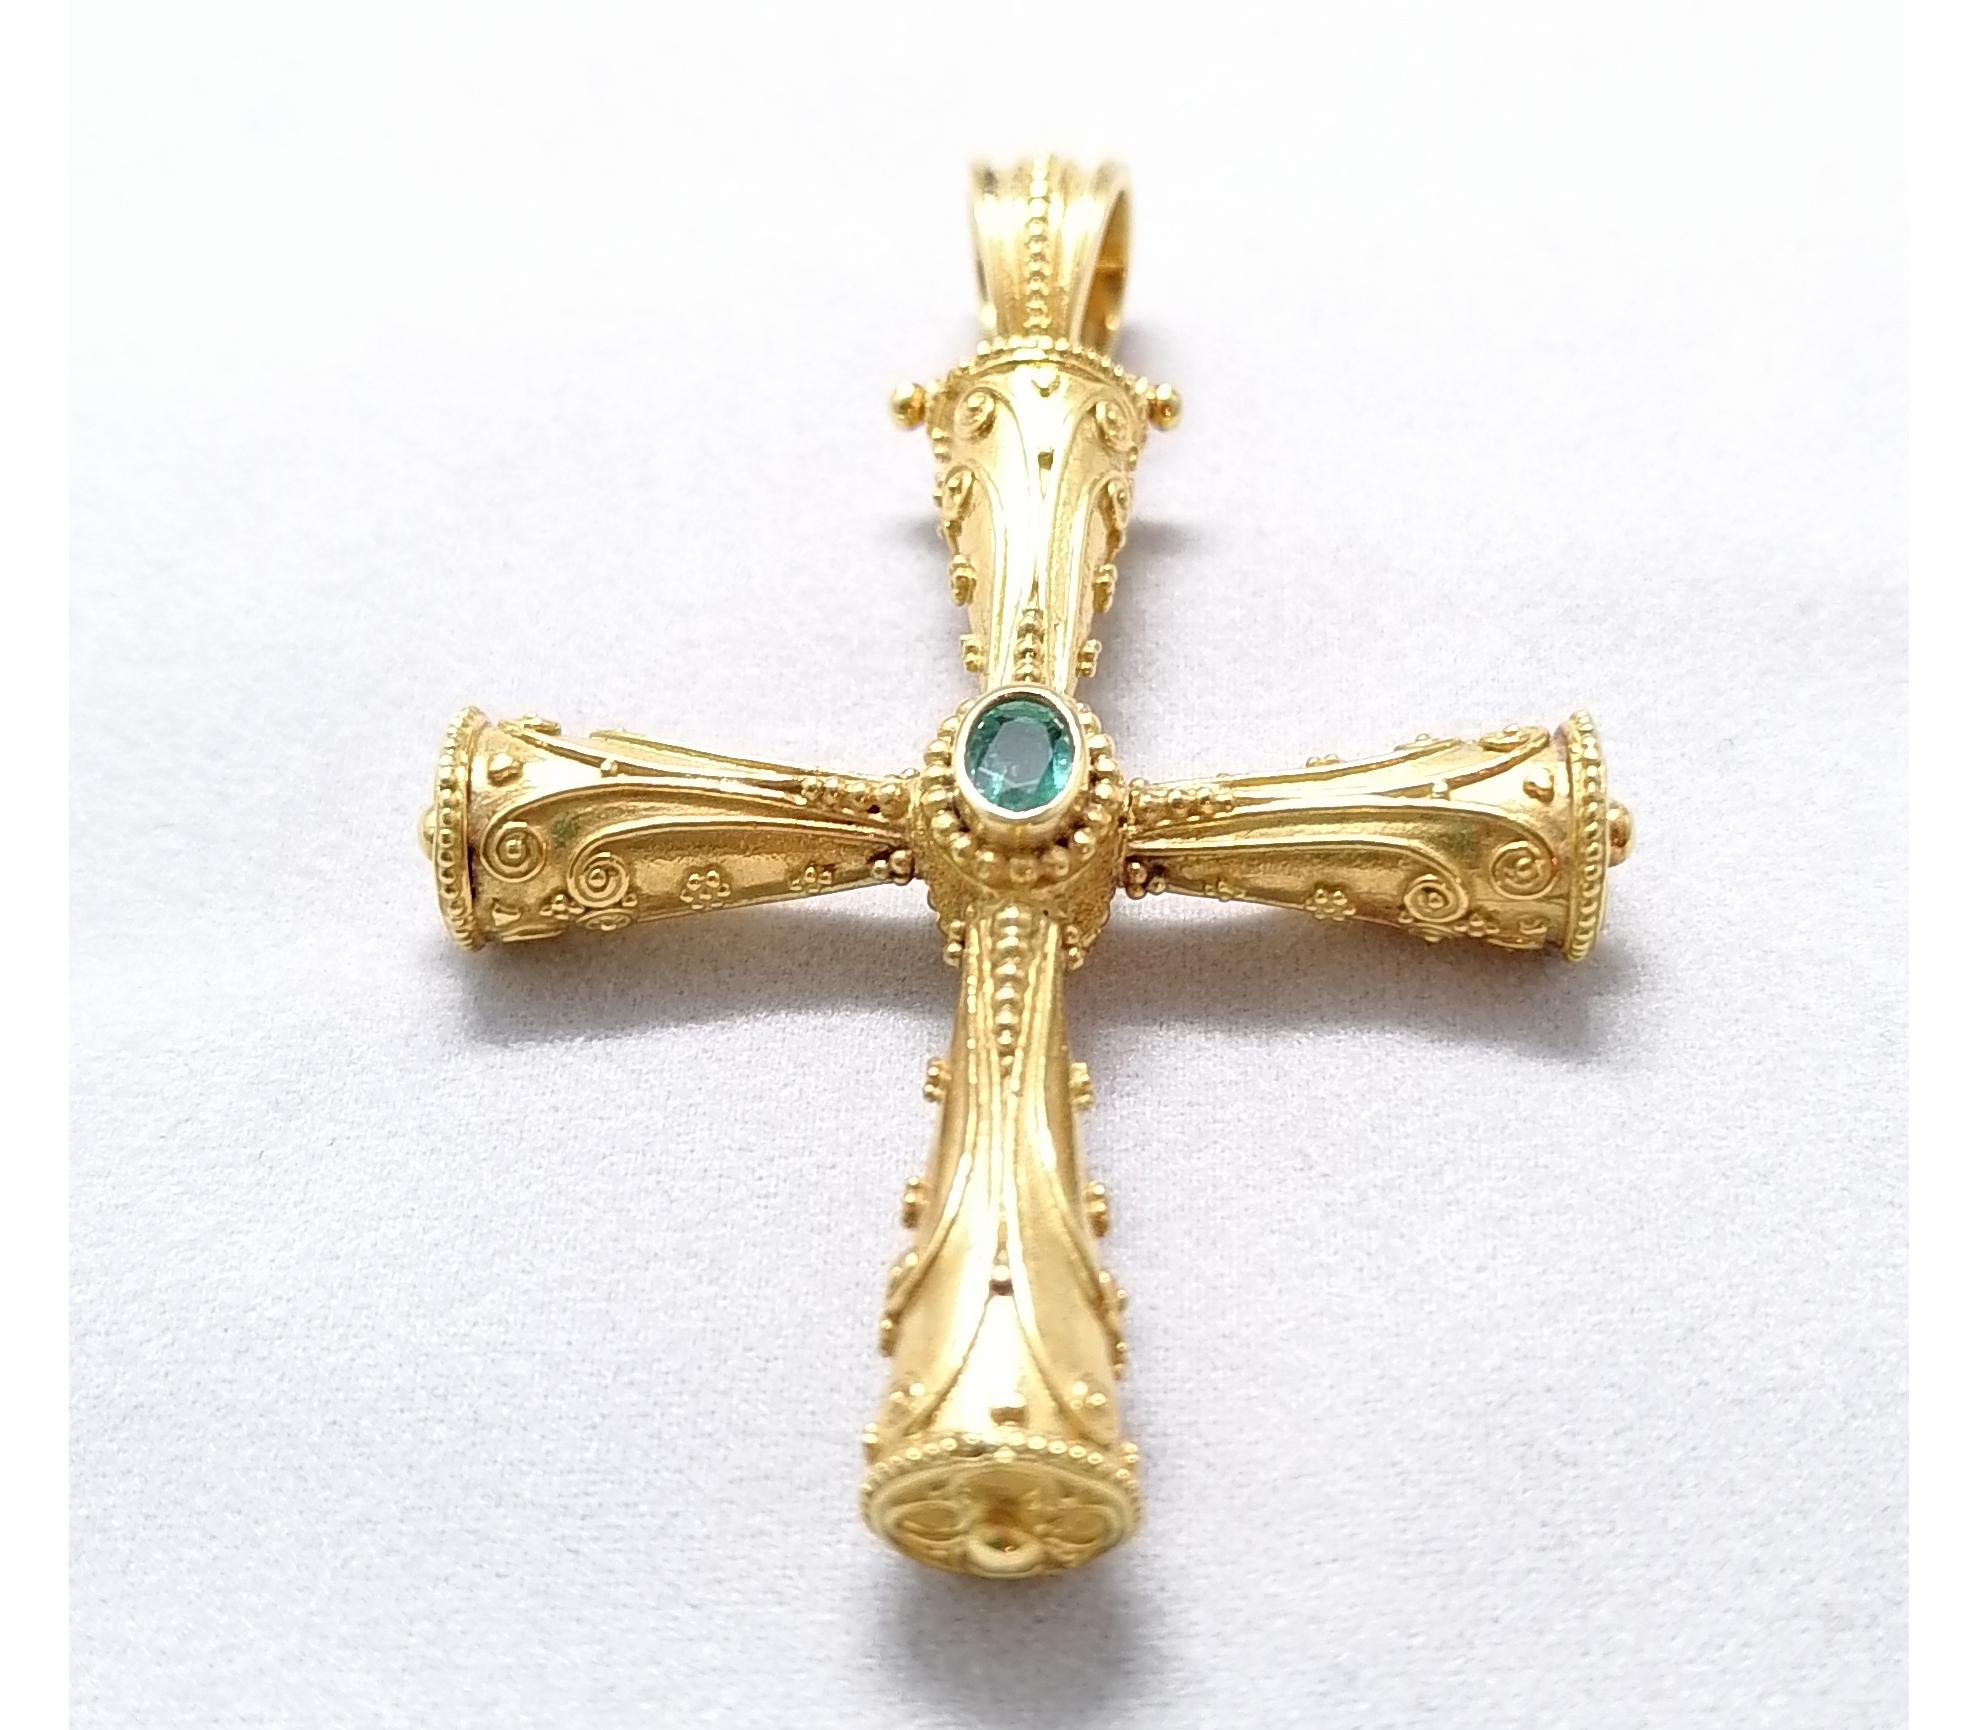 This S.Georgios solid 18 Karat Yellow Gold geometric reversible 3-D Cross pendant is beautifully handmade with microscopically decorated Byzantine-style granulation work and finished with a unique velvet background look. This stunning cross pendant